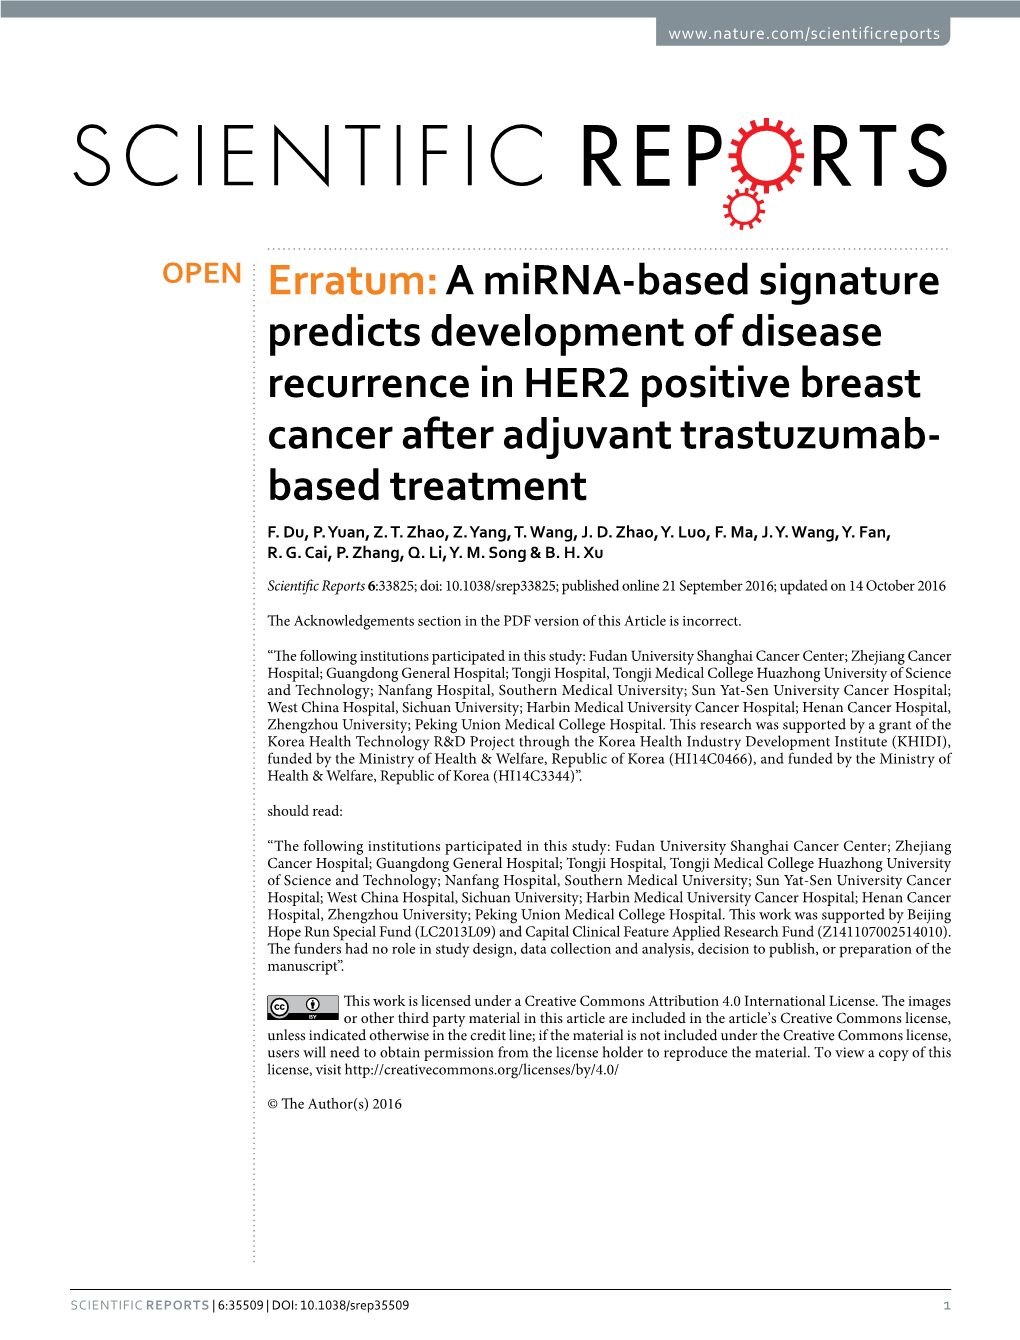 A Mirna-Based Signature Predicts Development of Disease Recurrence in HER2 Positive Breast Cancer After Adjuvant Trastuzumab- Based Treatment F